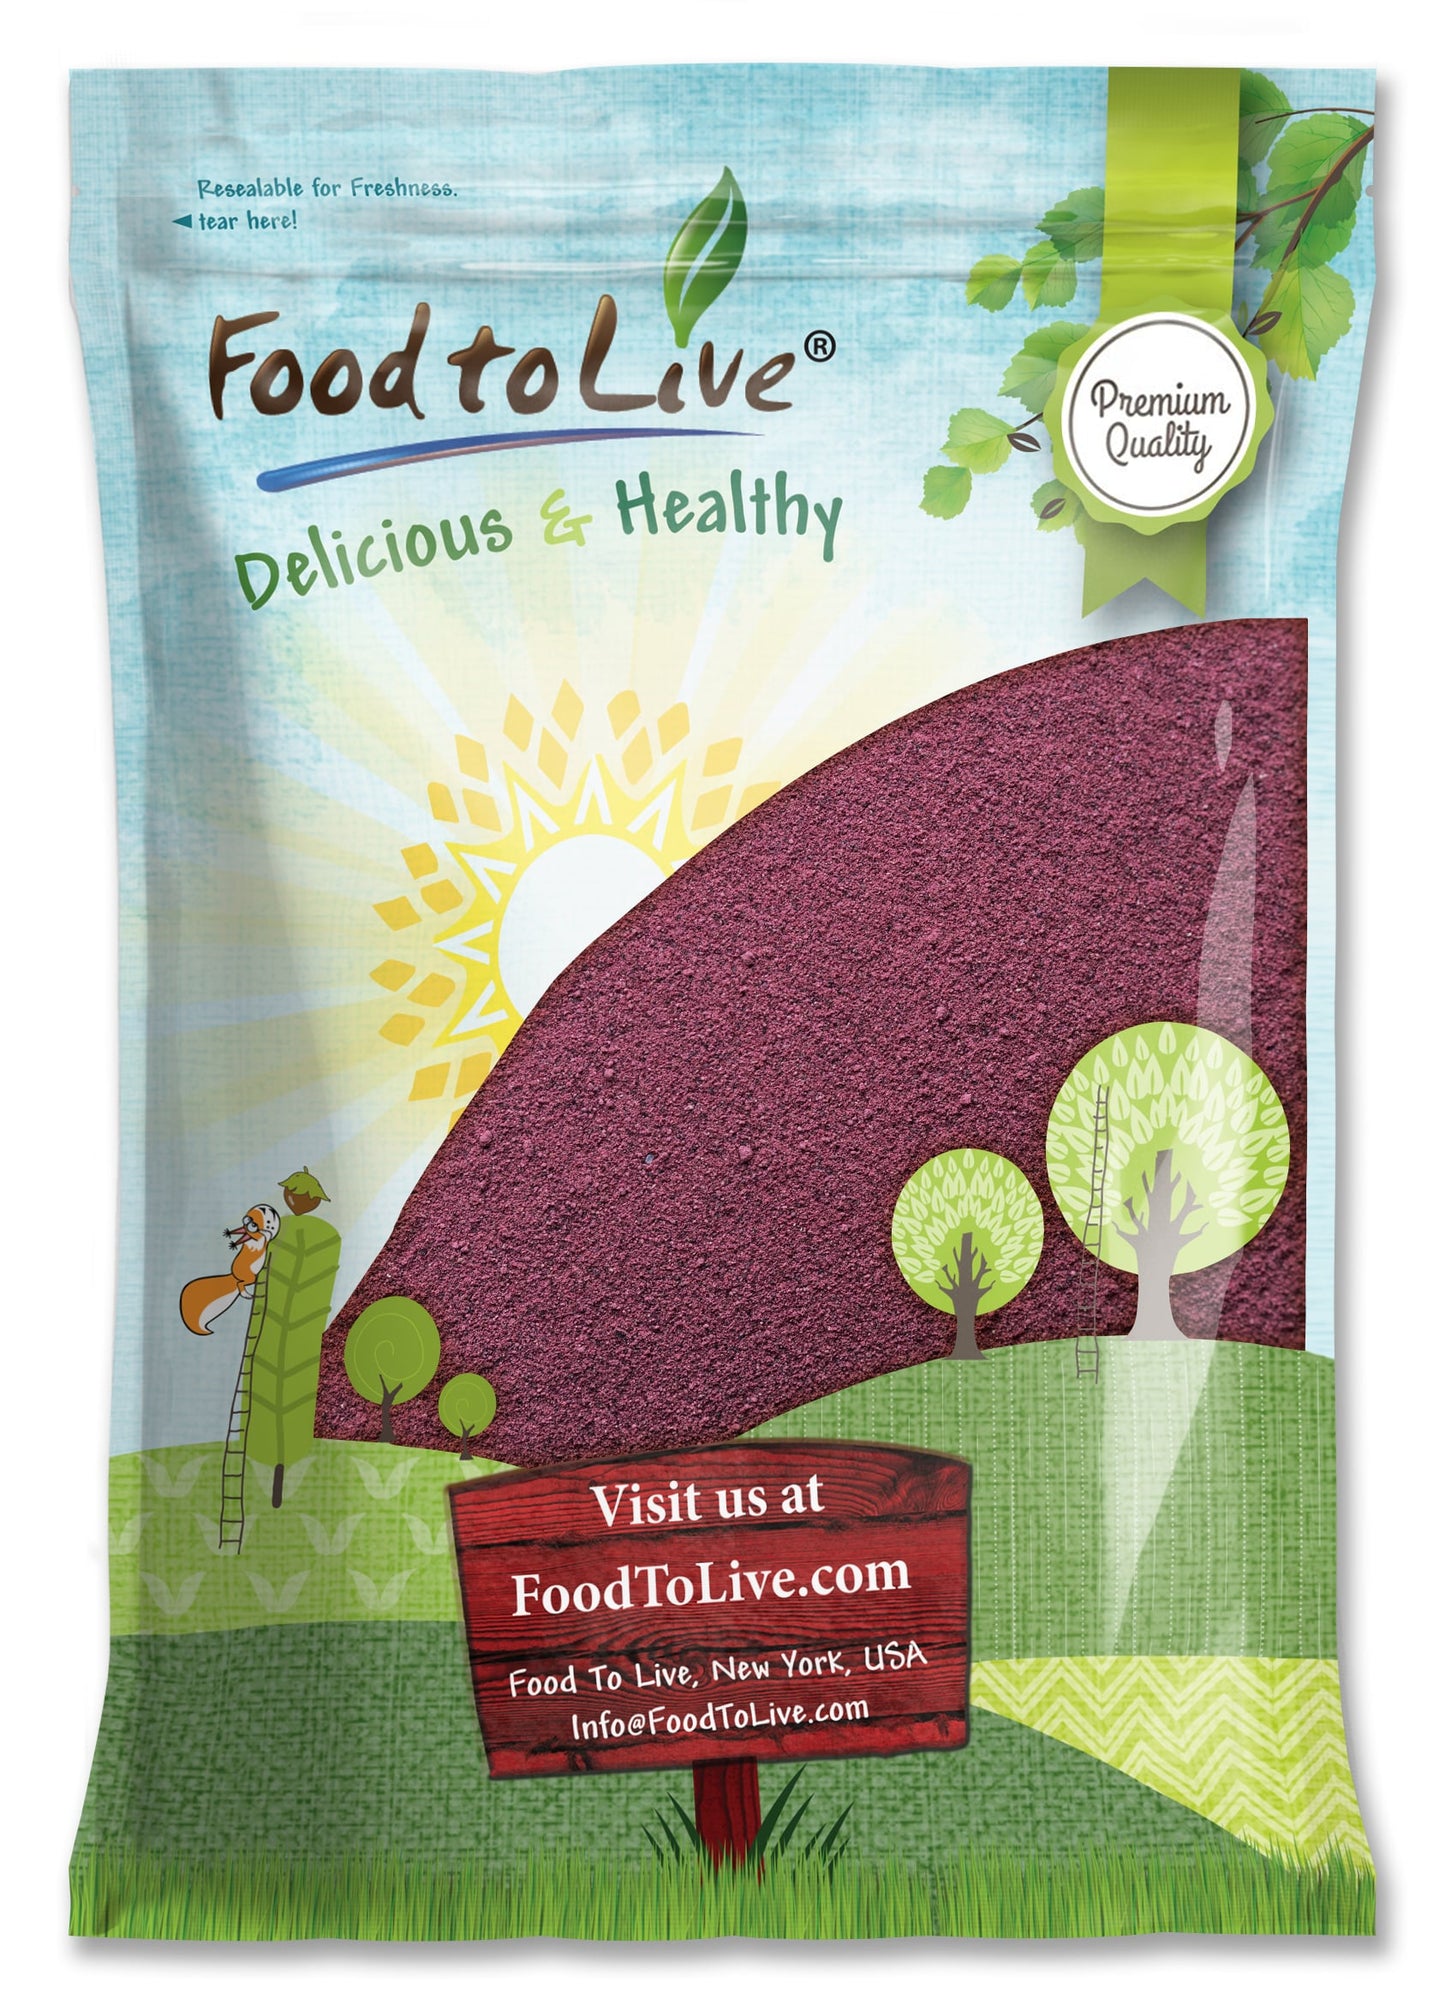 Black Elderberry Powder - Made from Raw Dried Berries, Unsulfured, Vegan, Bulk, Great for Baking, Juices, Smoothies, Yogurts, and Instant Breakfast Drinks, No Sulphites - by Food to Live